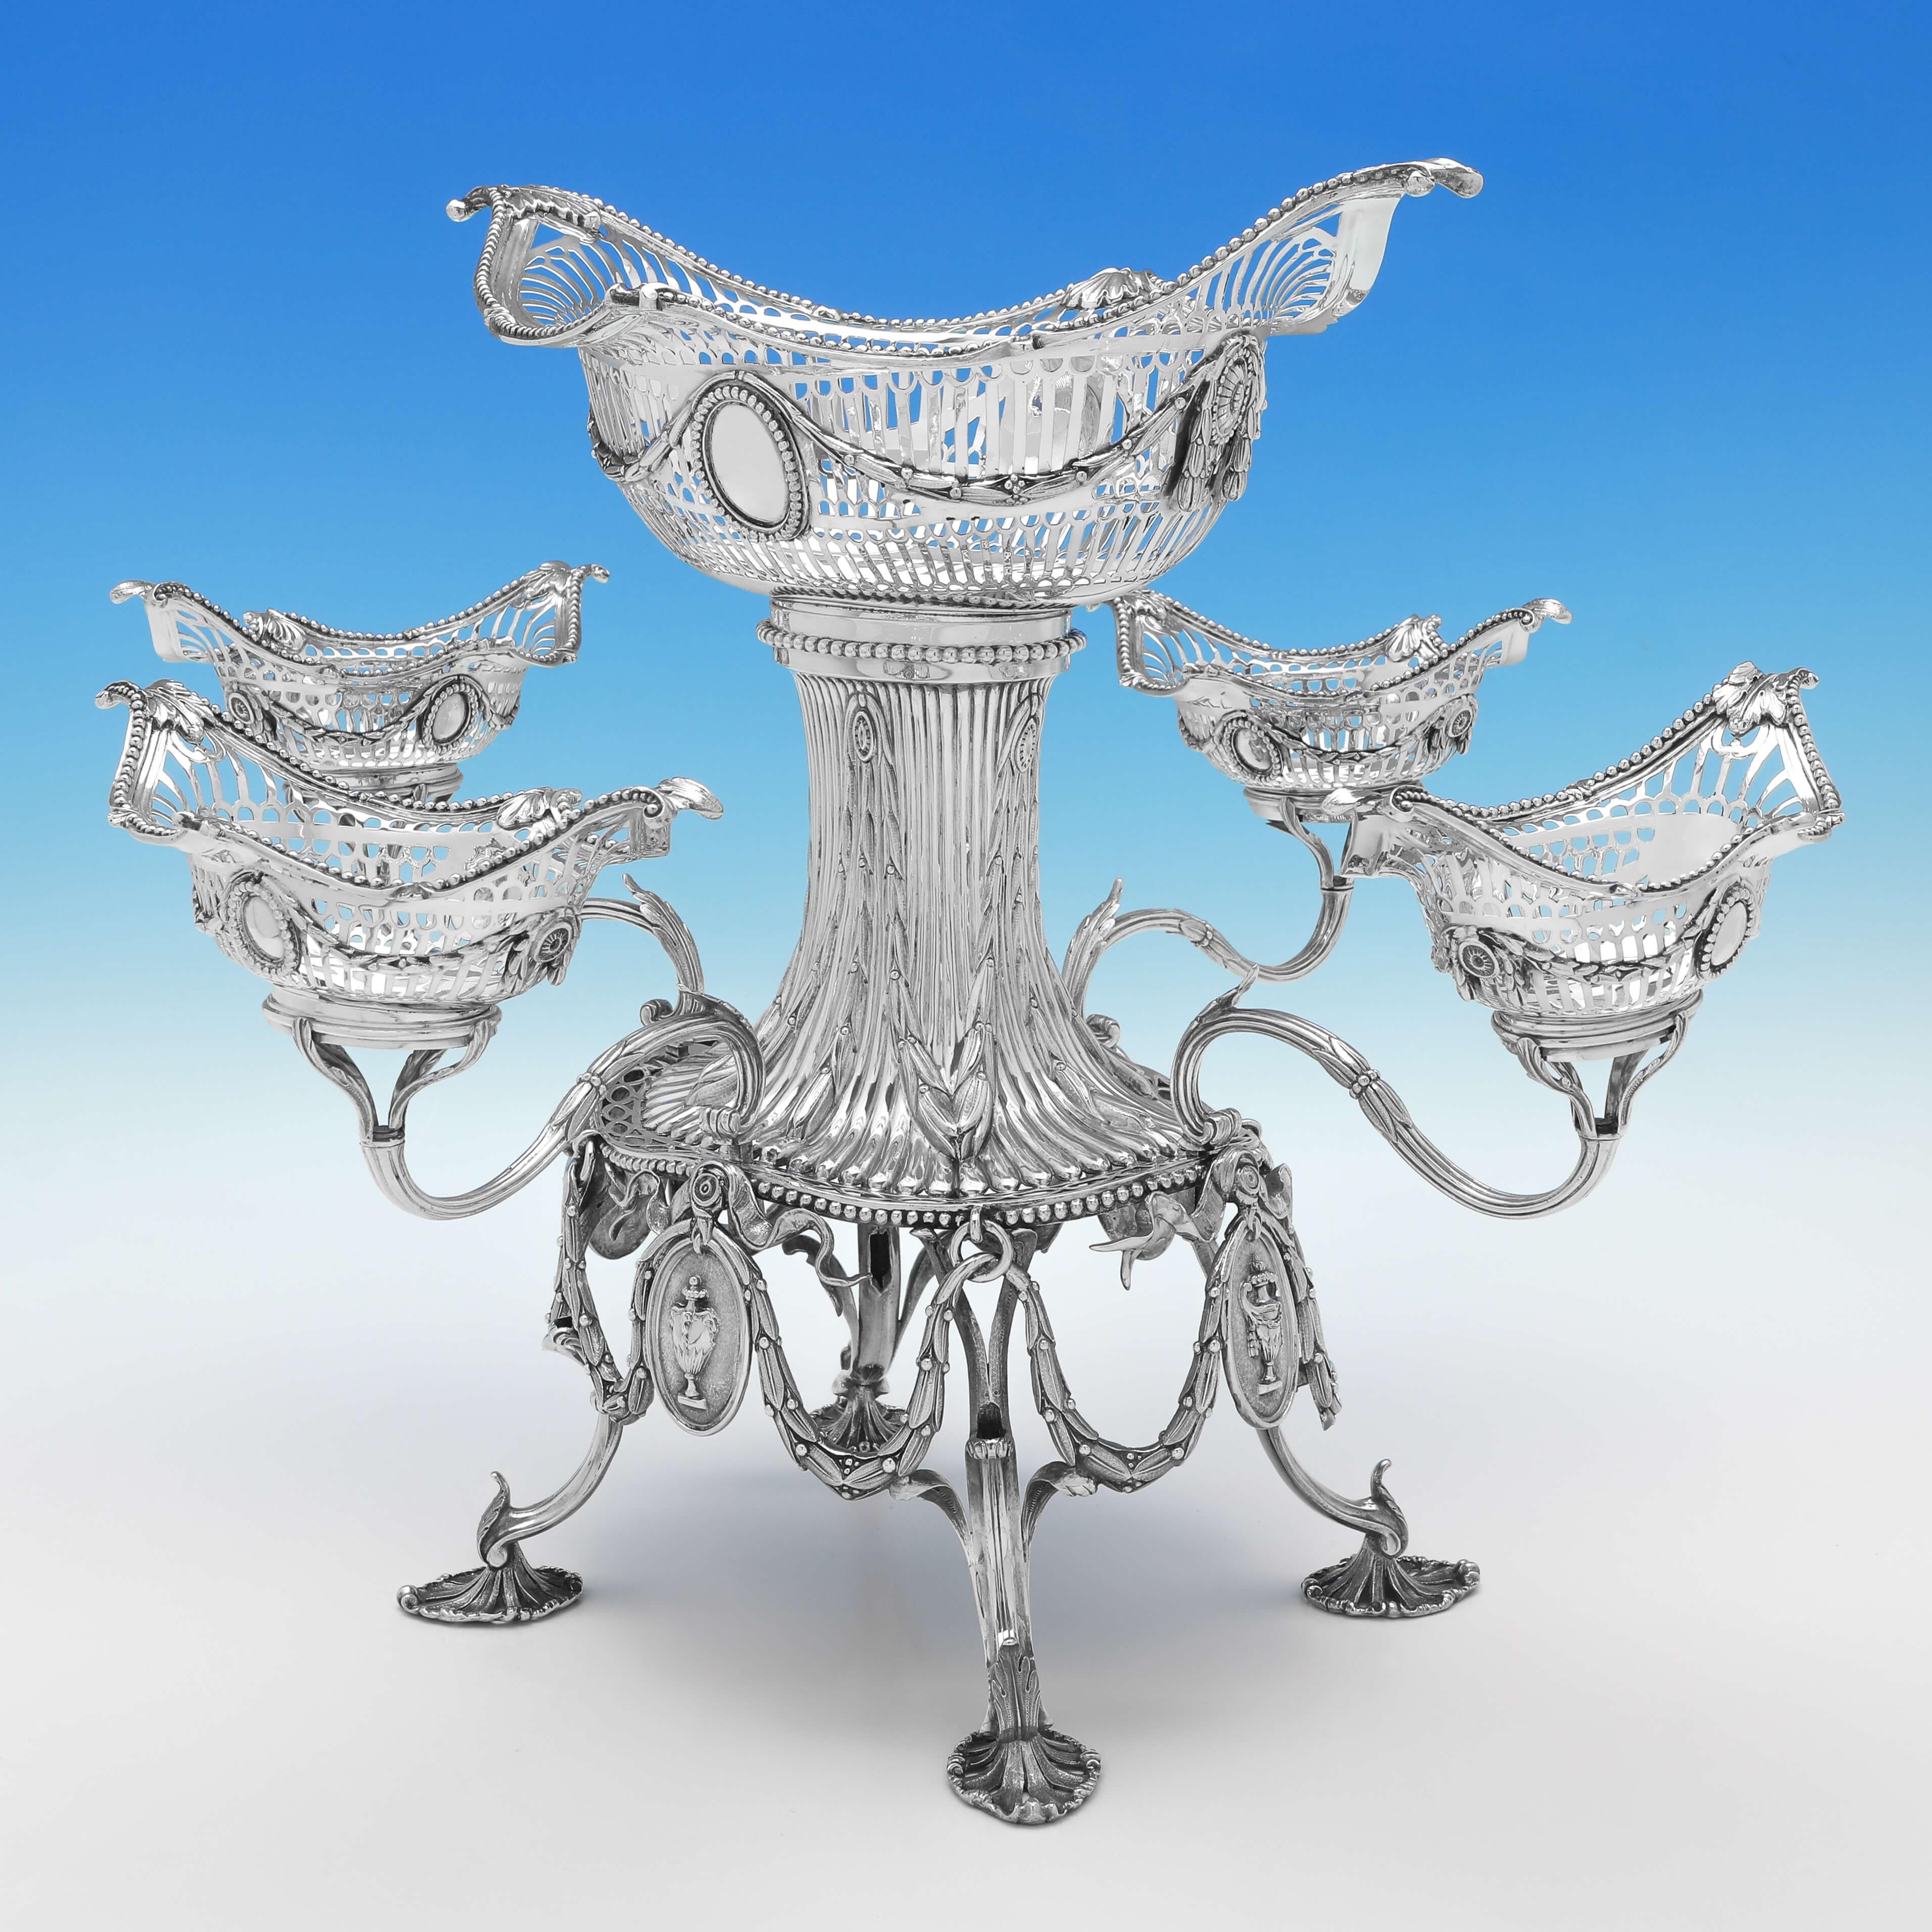 Neoclassical Victorian Antique Sterling Silver Centrepiece or Epergne, 1892 For Sale 3